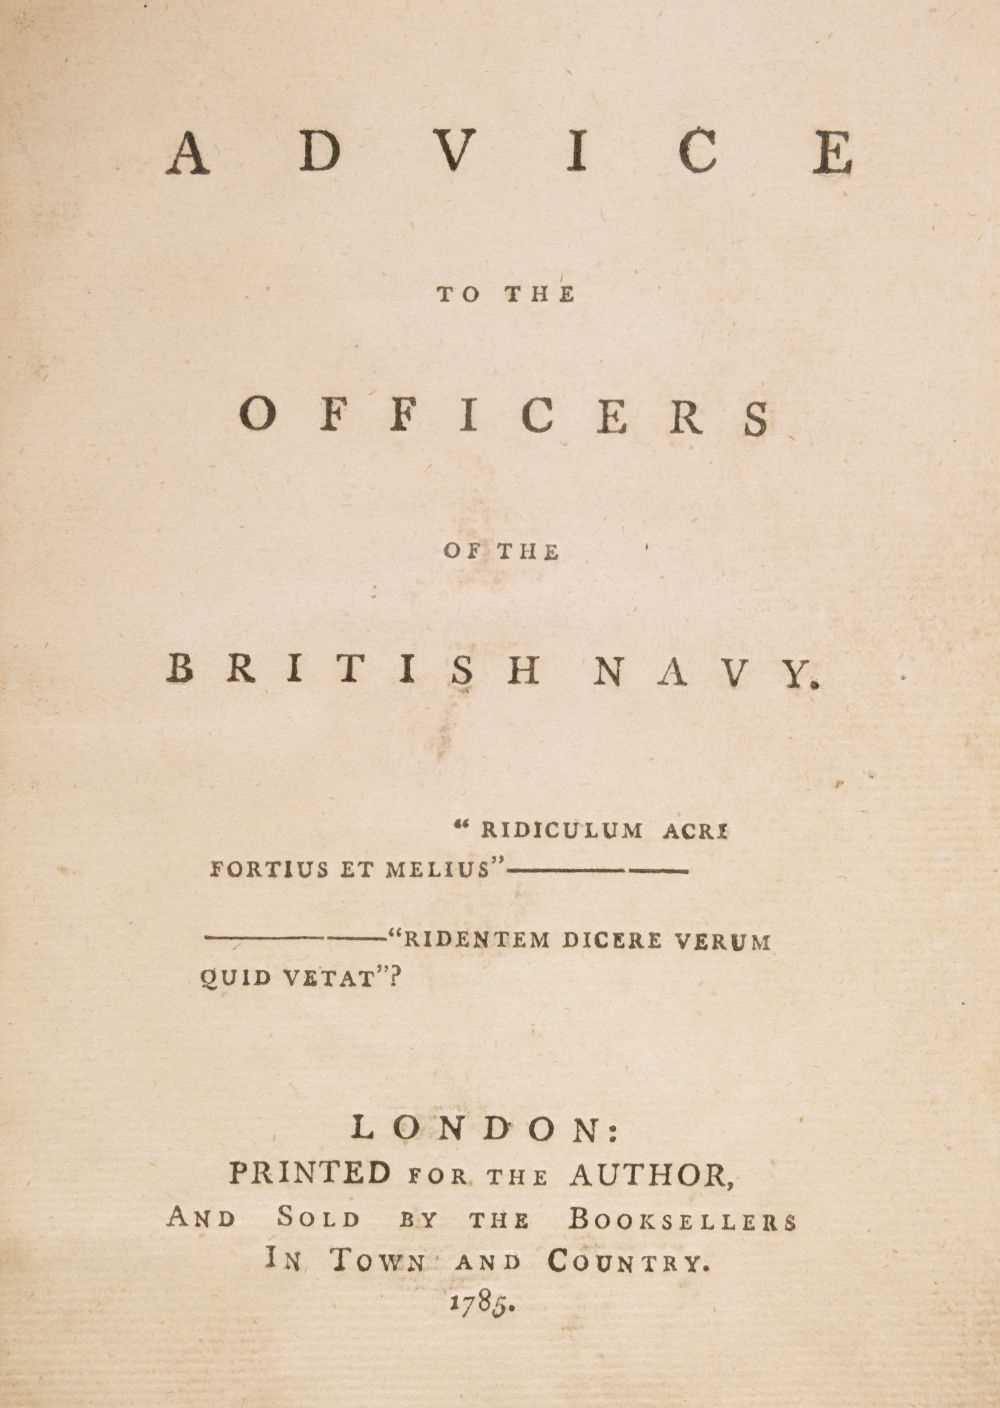 Lot 53 - Royal Navy. Advice to the Officers of the British Navy, 1st edition, 1785, rare satire